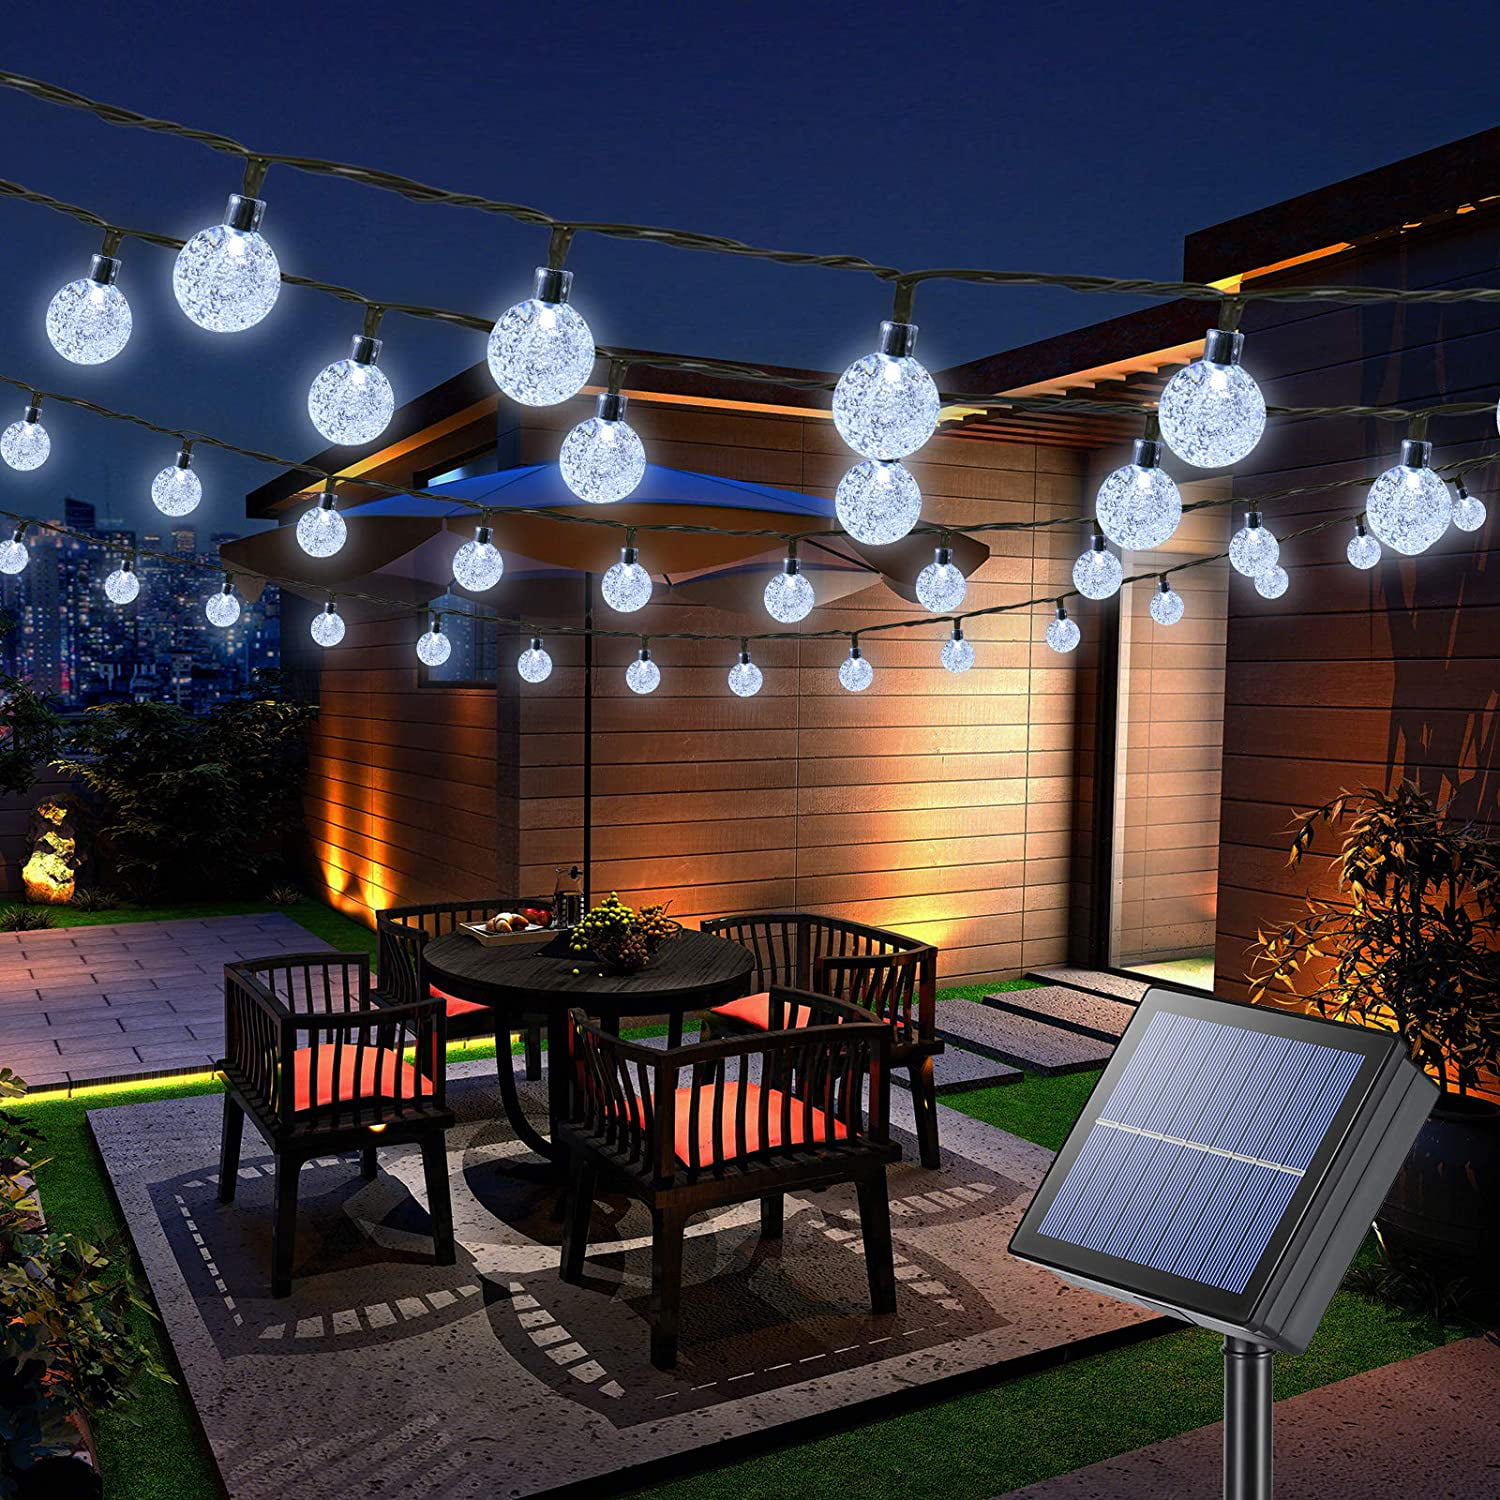 LED Waterproof Crystal Ball String Lights For Gazebo Canopy Patio Outdoor Design 